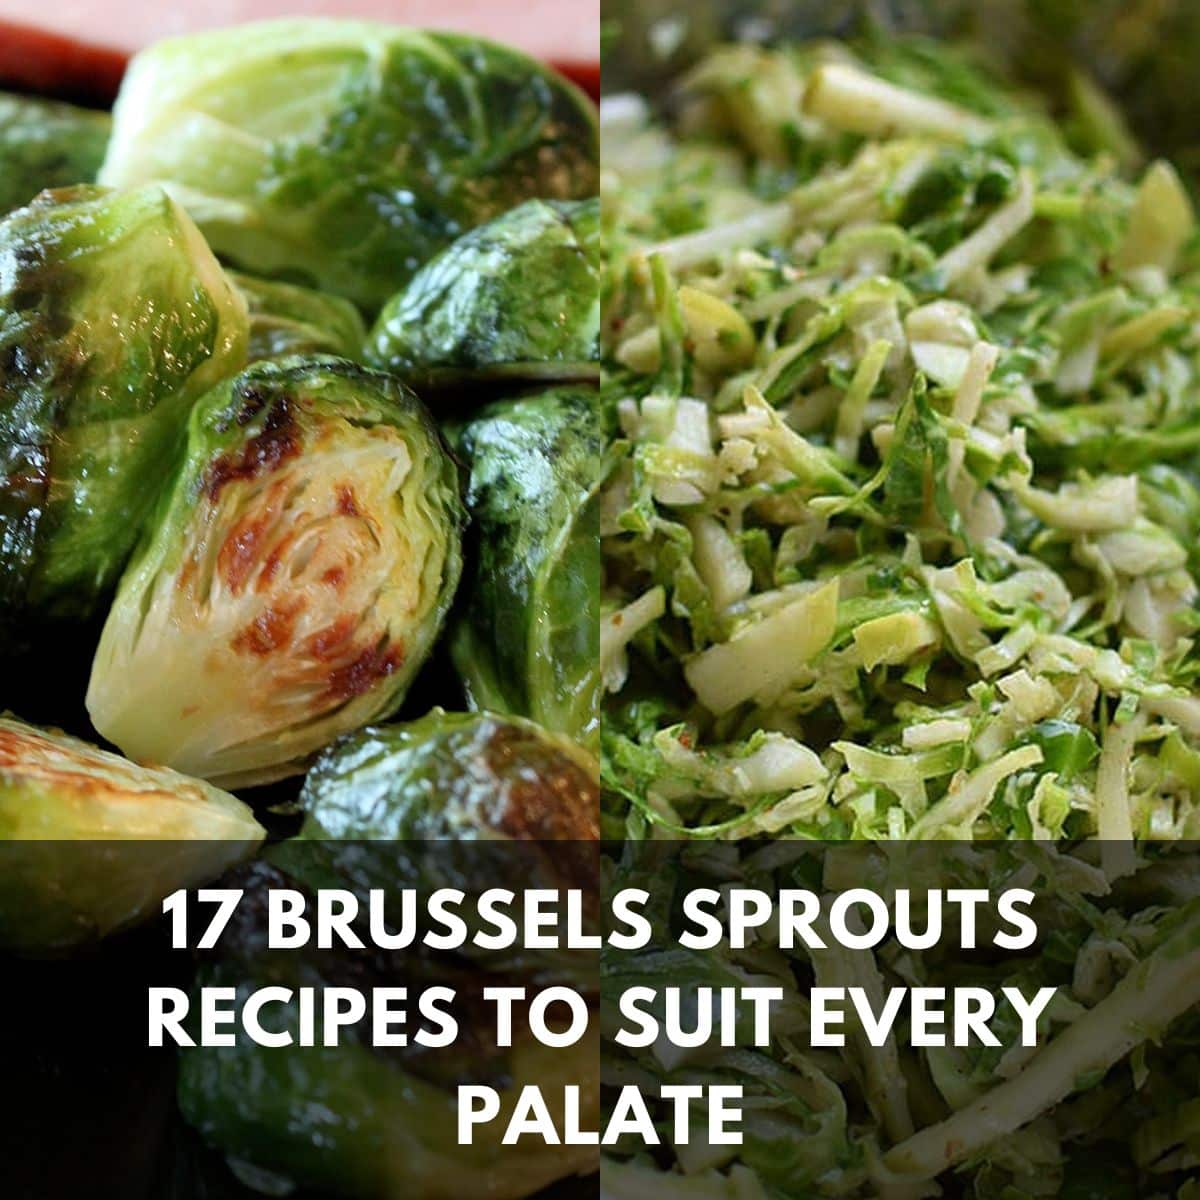 17 brussels sprouts recipes to suit every palate main